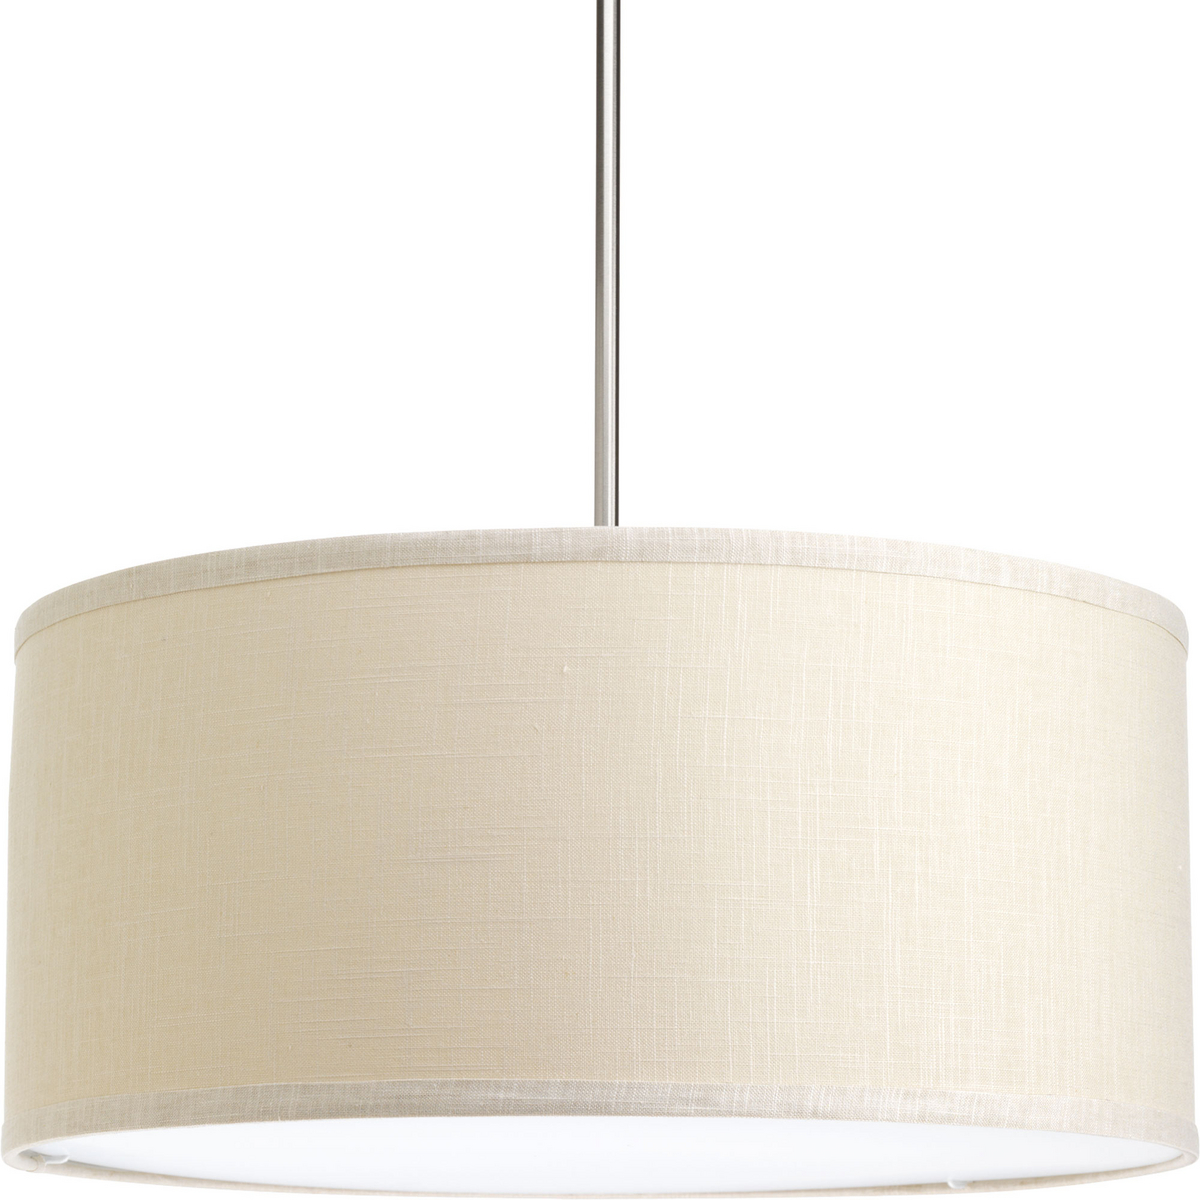 The Markor Series is a modular pendant system. The versatile series allow the choice of shades and stem kits. This 22 in shade with khaki fabric is inspired by mid-century design. Acrylic bottom diffuser. This shade can be used with a variety of stem kits from 1 to 3 light in CFL, LED and incandescent light sources.